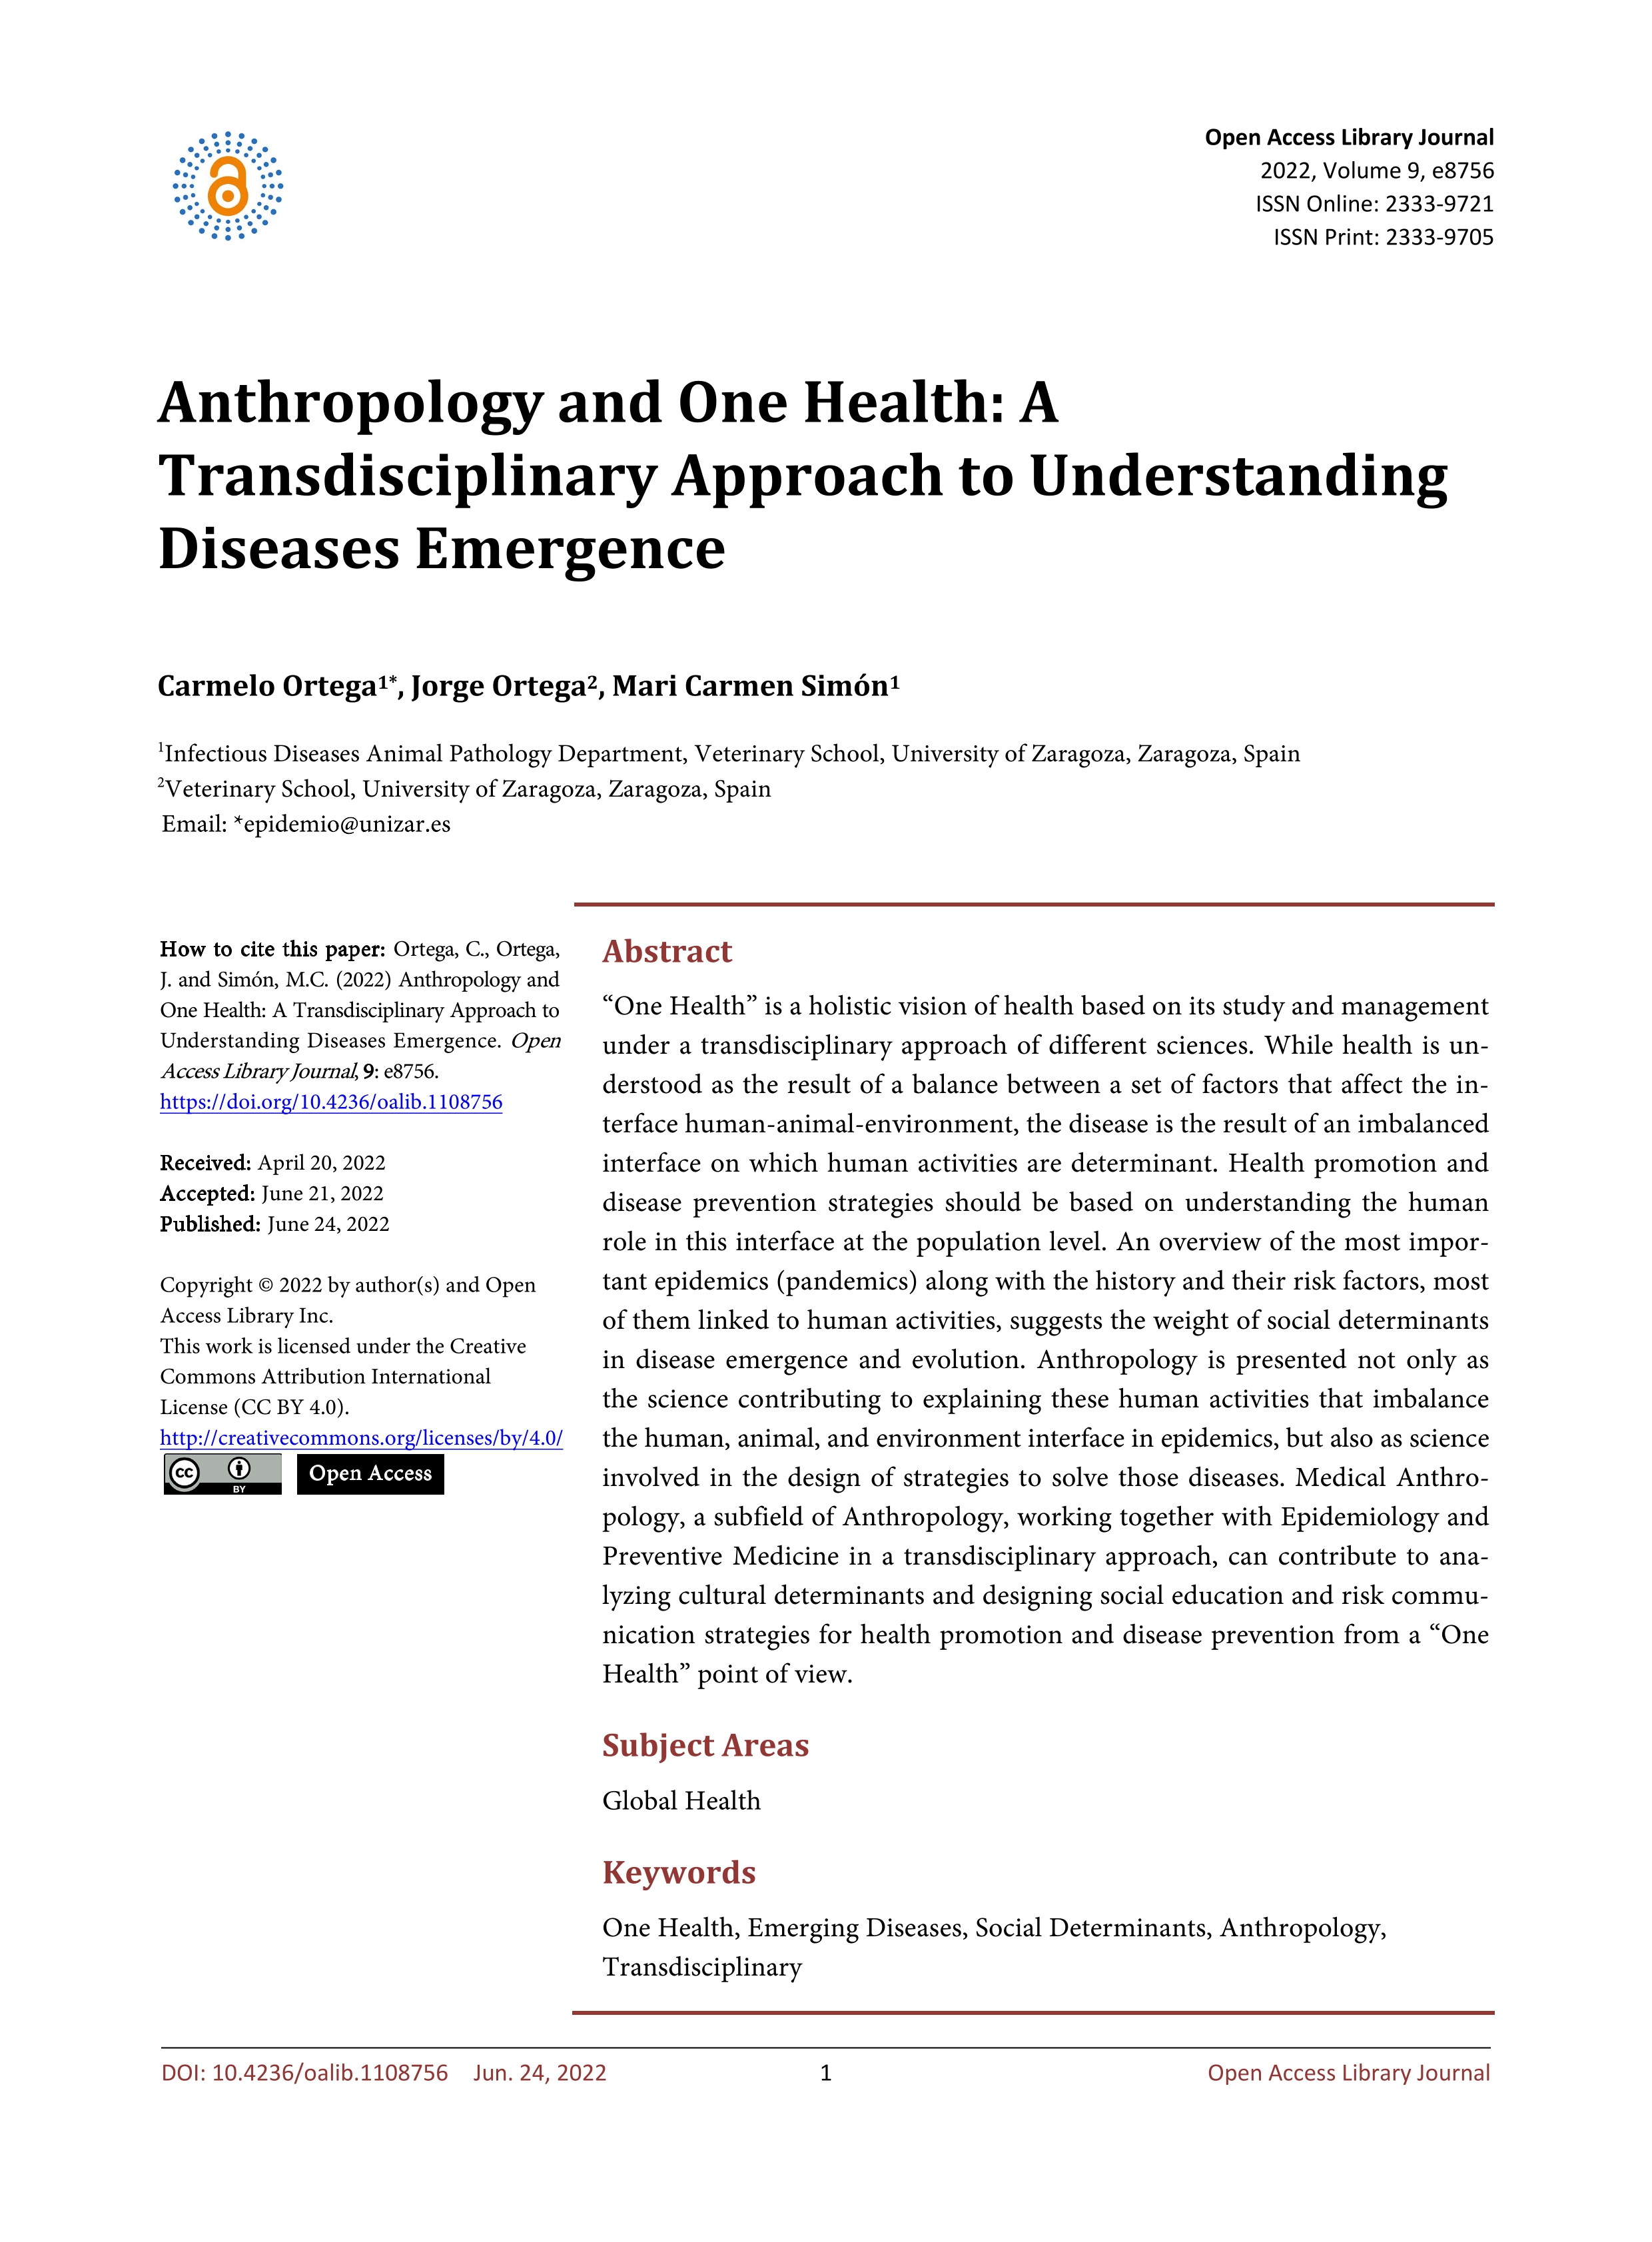 Anthropology and One Health: A Transdisciplinary Approach to Understanding Diseases Emergence